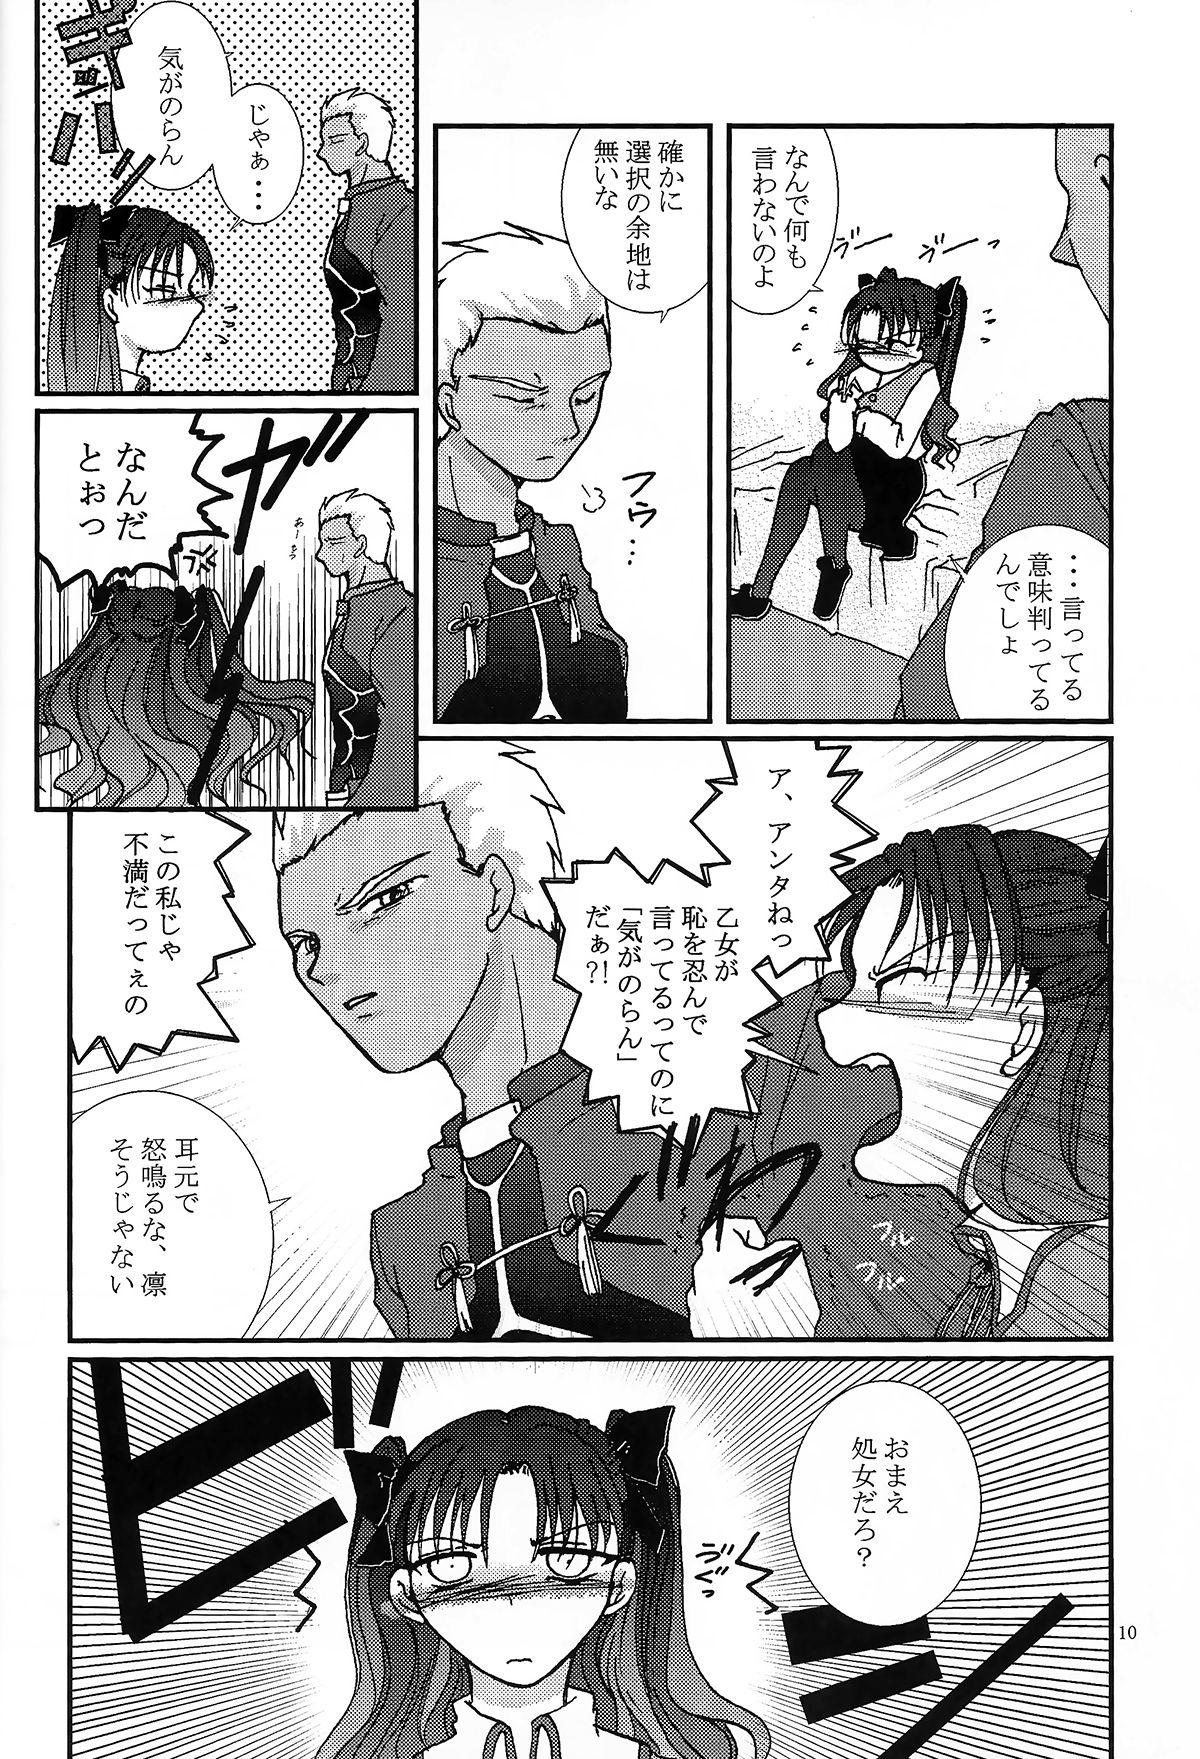 Masturbando Question-7 - Fate stay night Shaved - Page 8